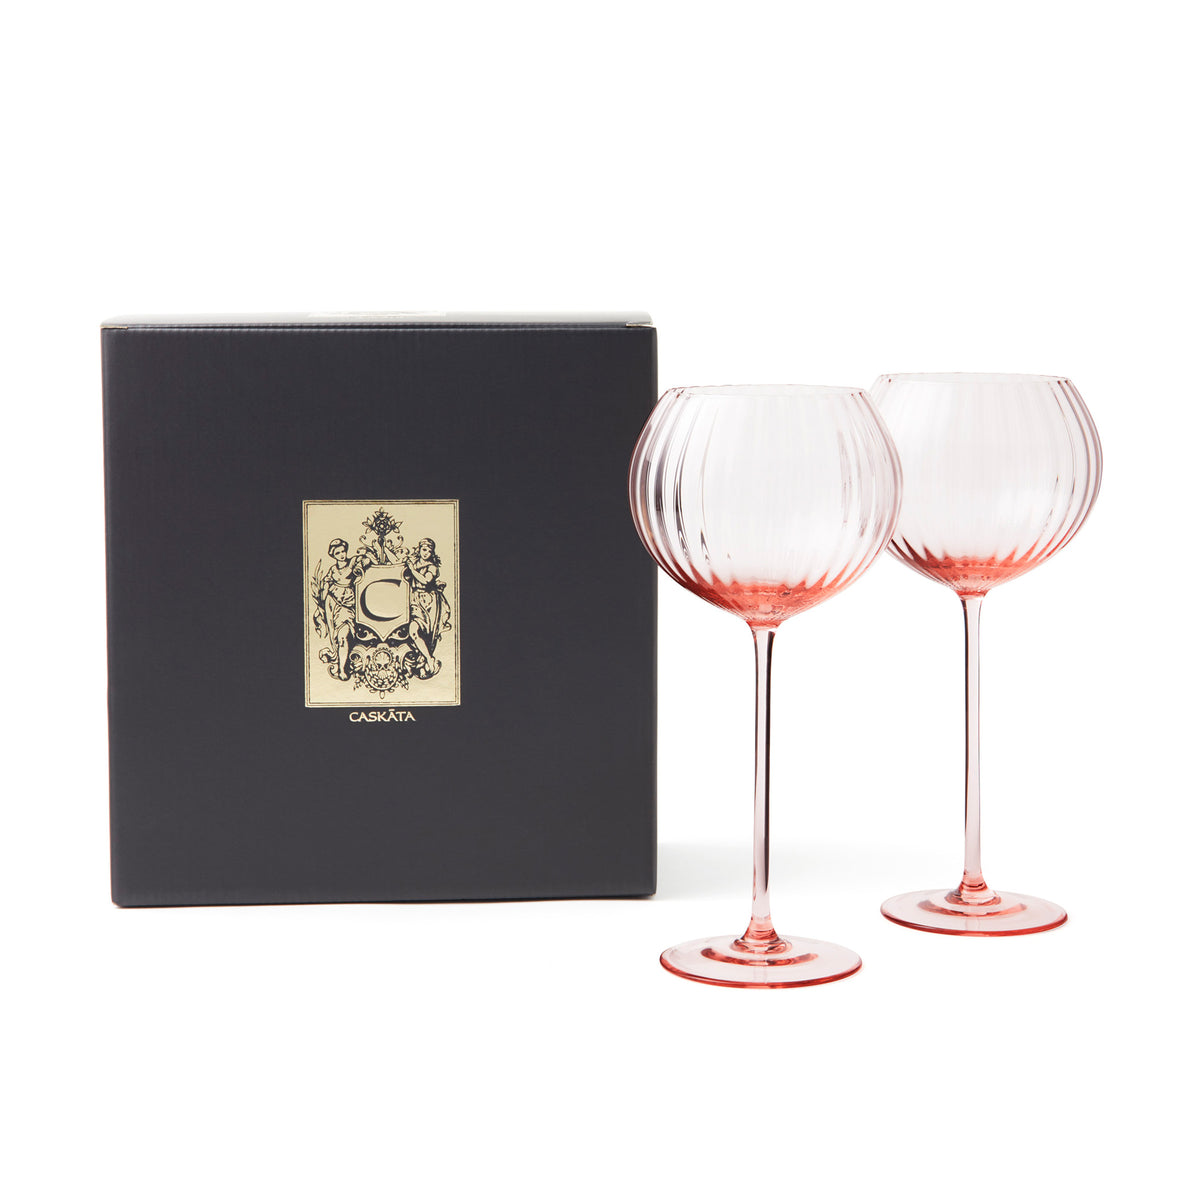 Quinn rose pink mouth-blown crystal red wine glasses from Caskata.